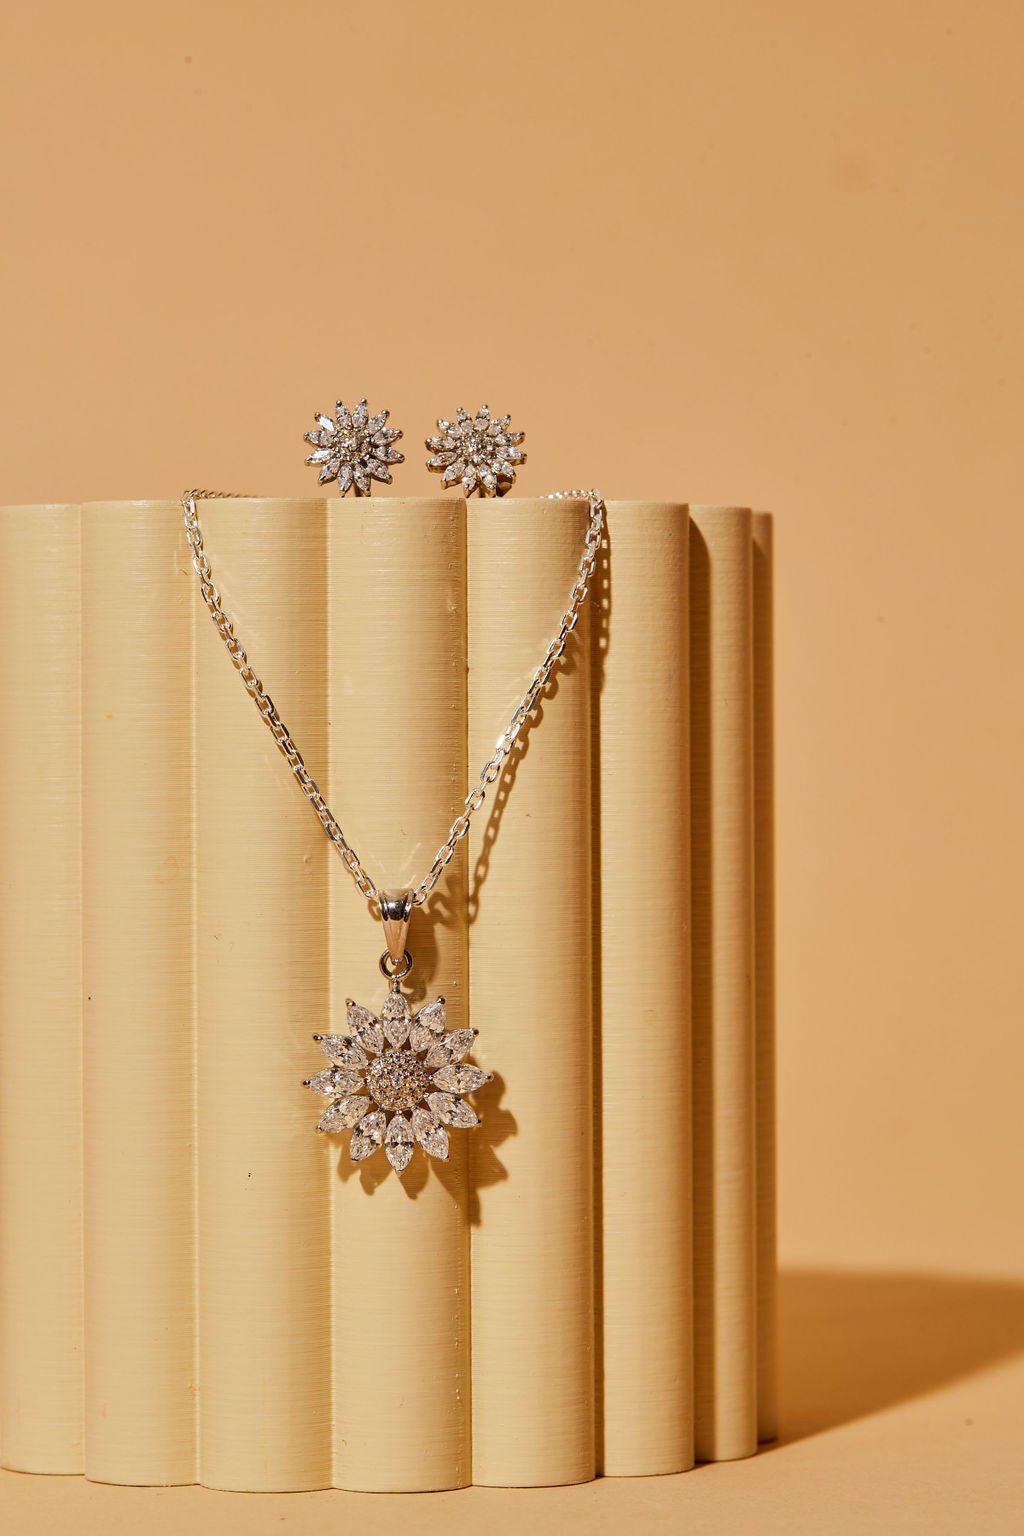 Helianthus Crystal Sterling Silver Necklace & Earring SET - Ema Jewels